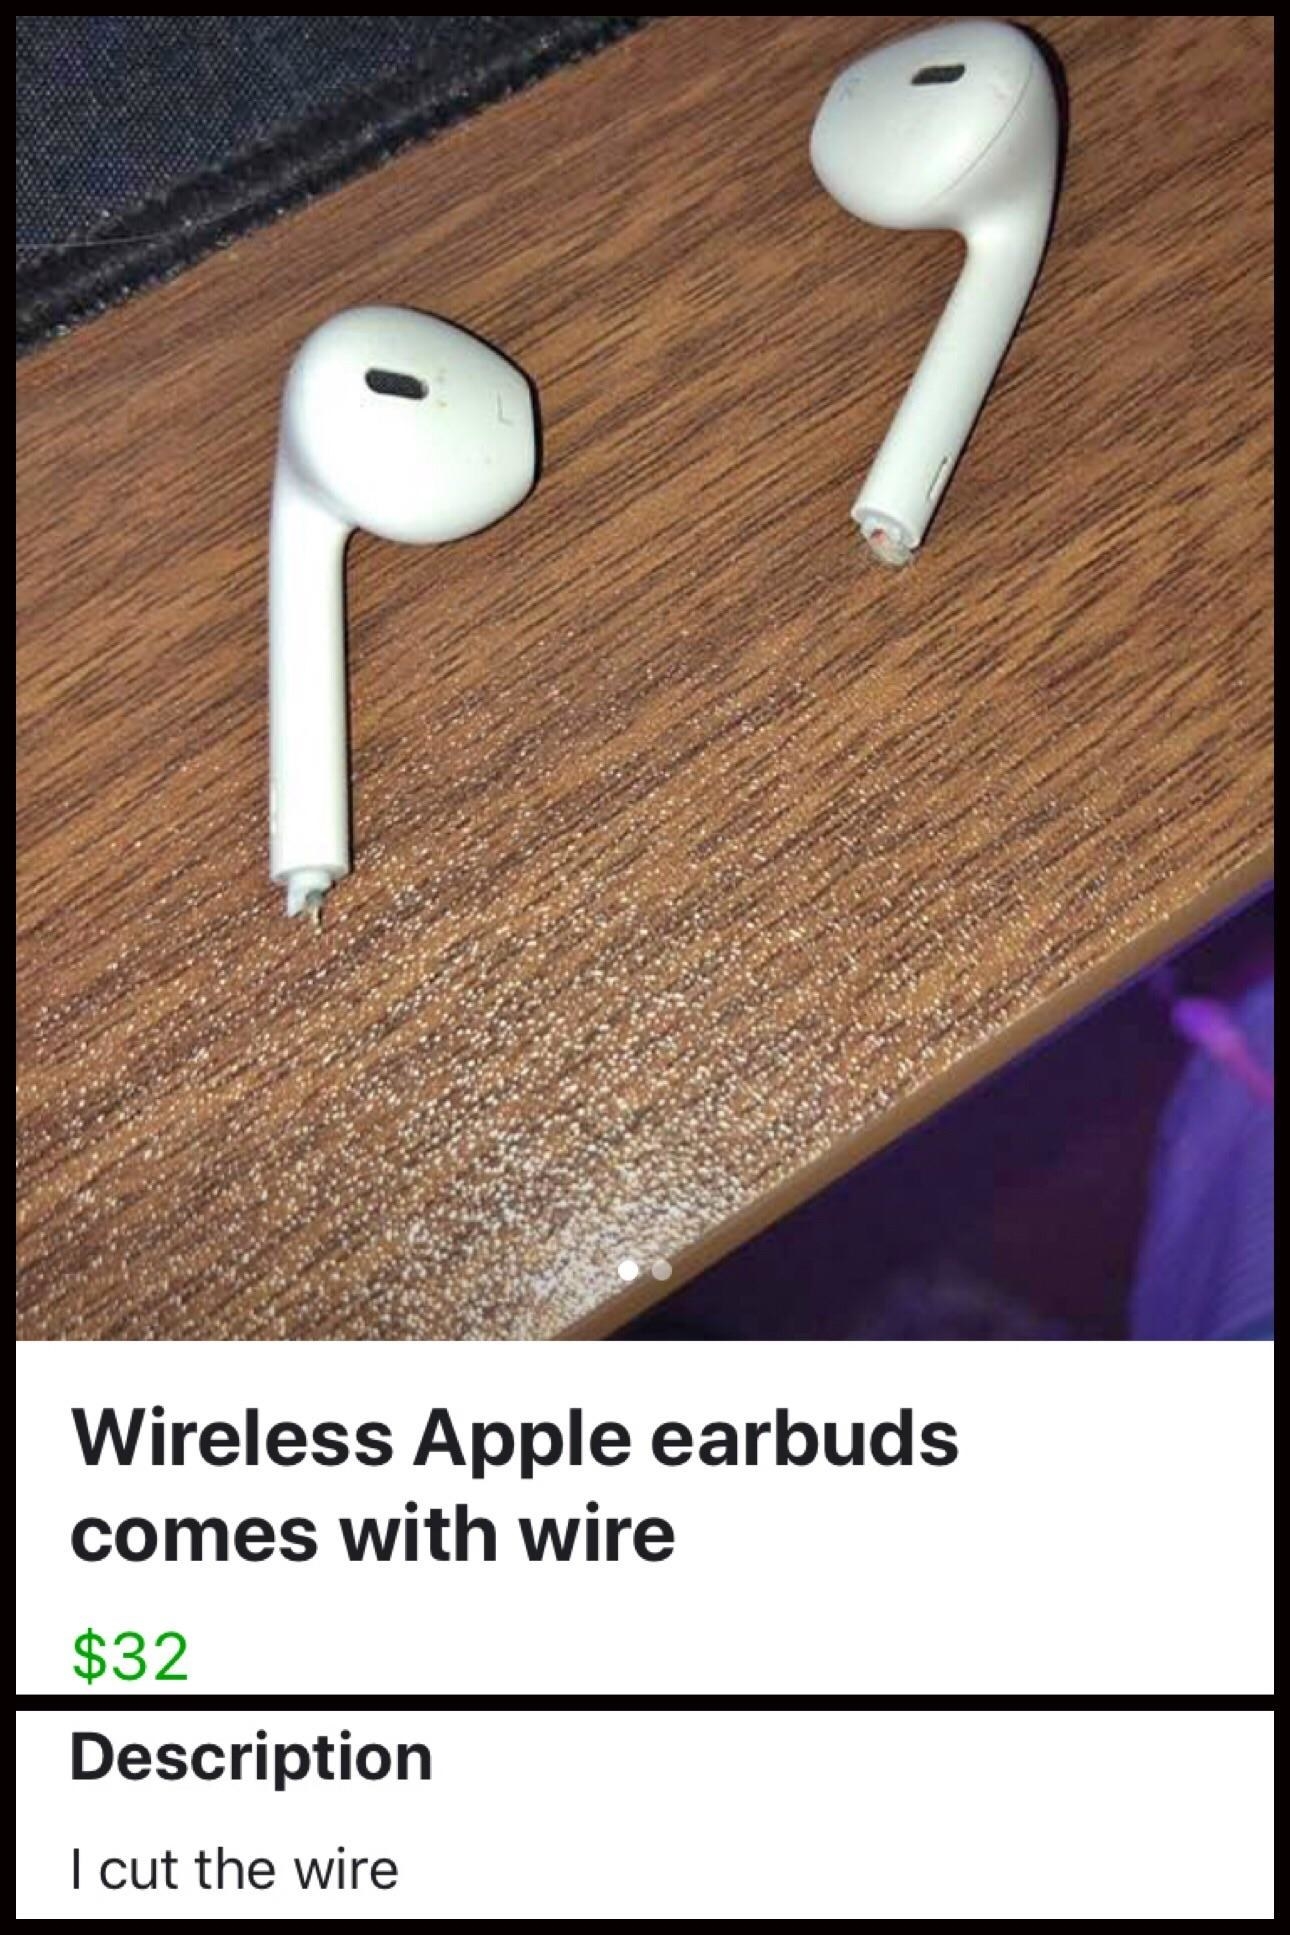 Someone selling wireless Apple earbuds with the wire cut off